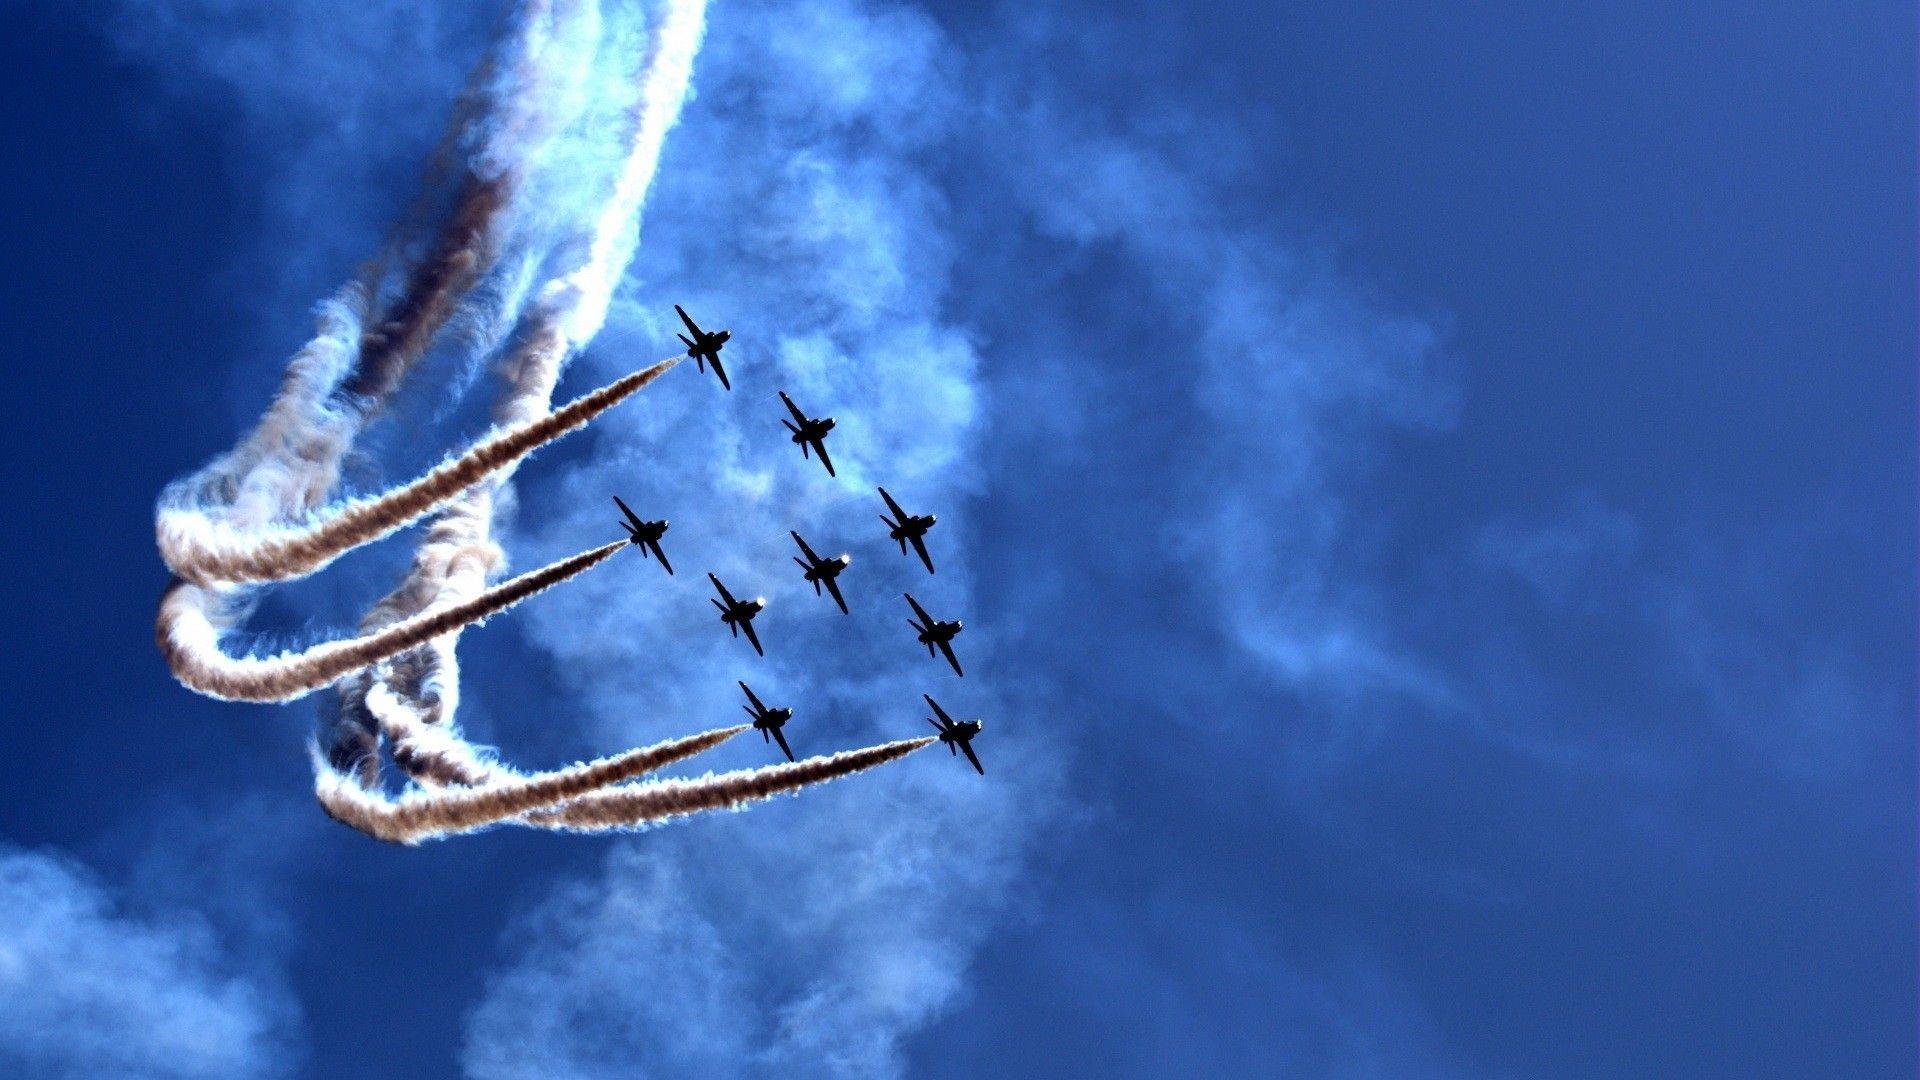 Awesome Jet Logo - Awesome Jet Formation Wallpaper 45679 1920x1080px